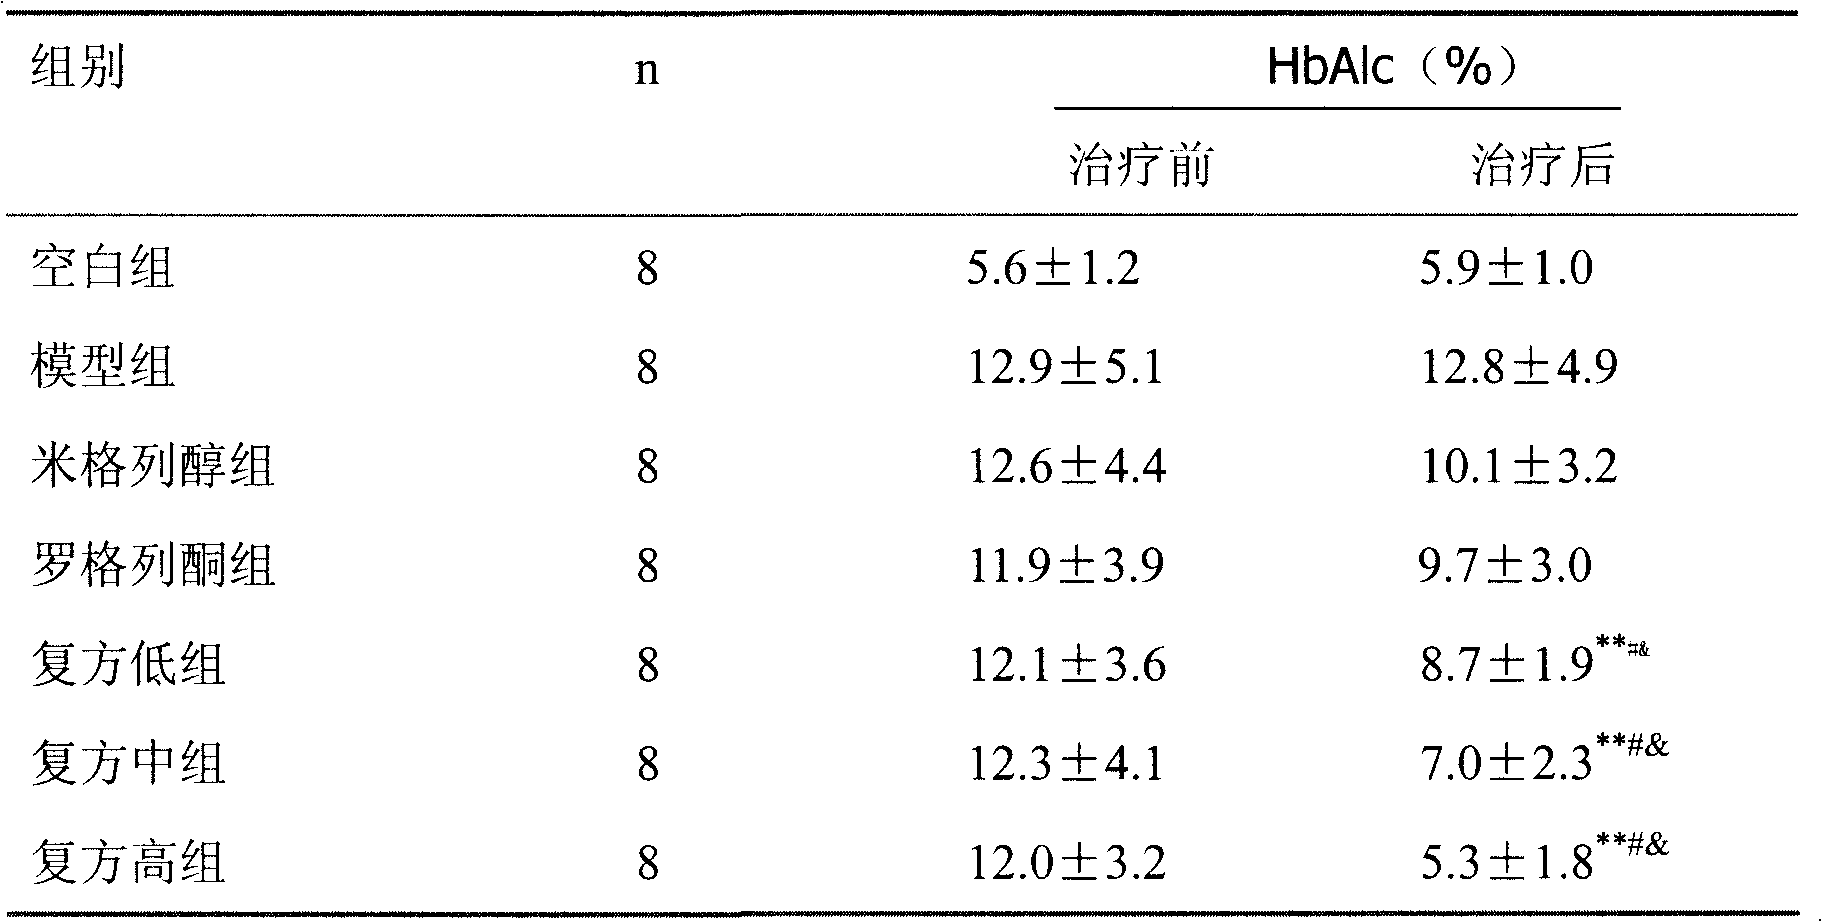 Medicine composition containing insulin intensifier and miglitol